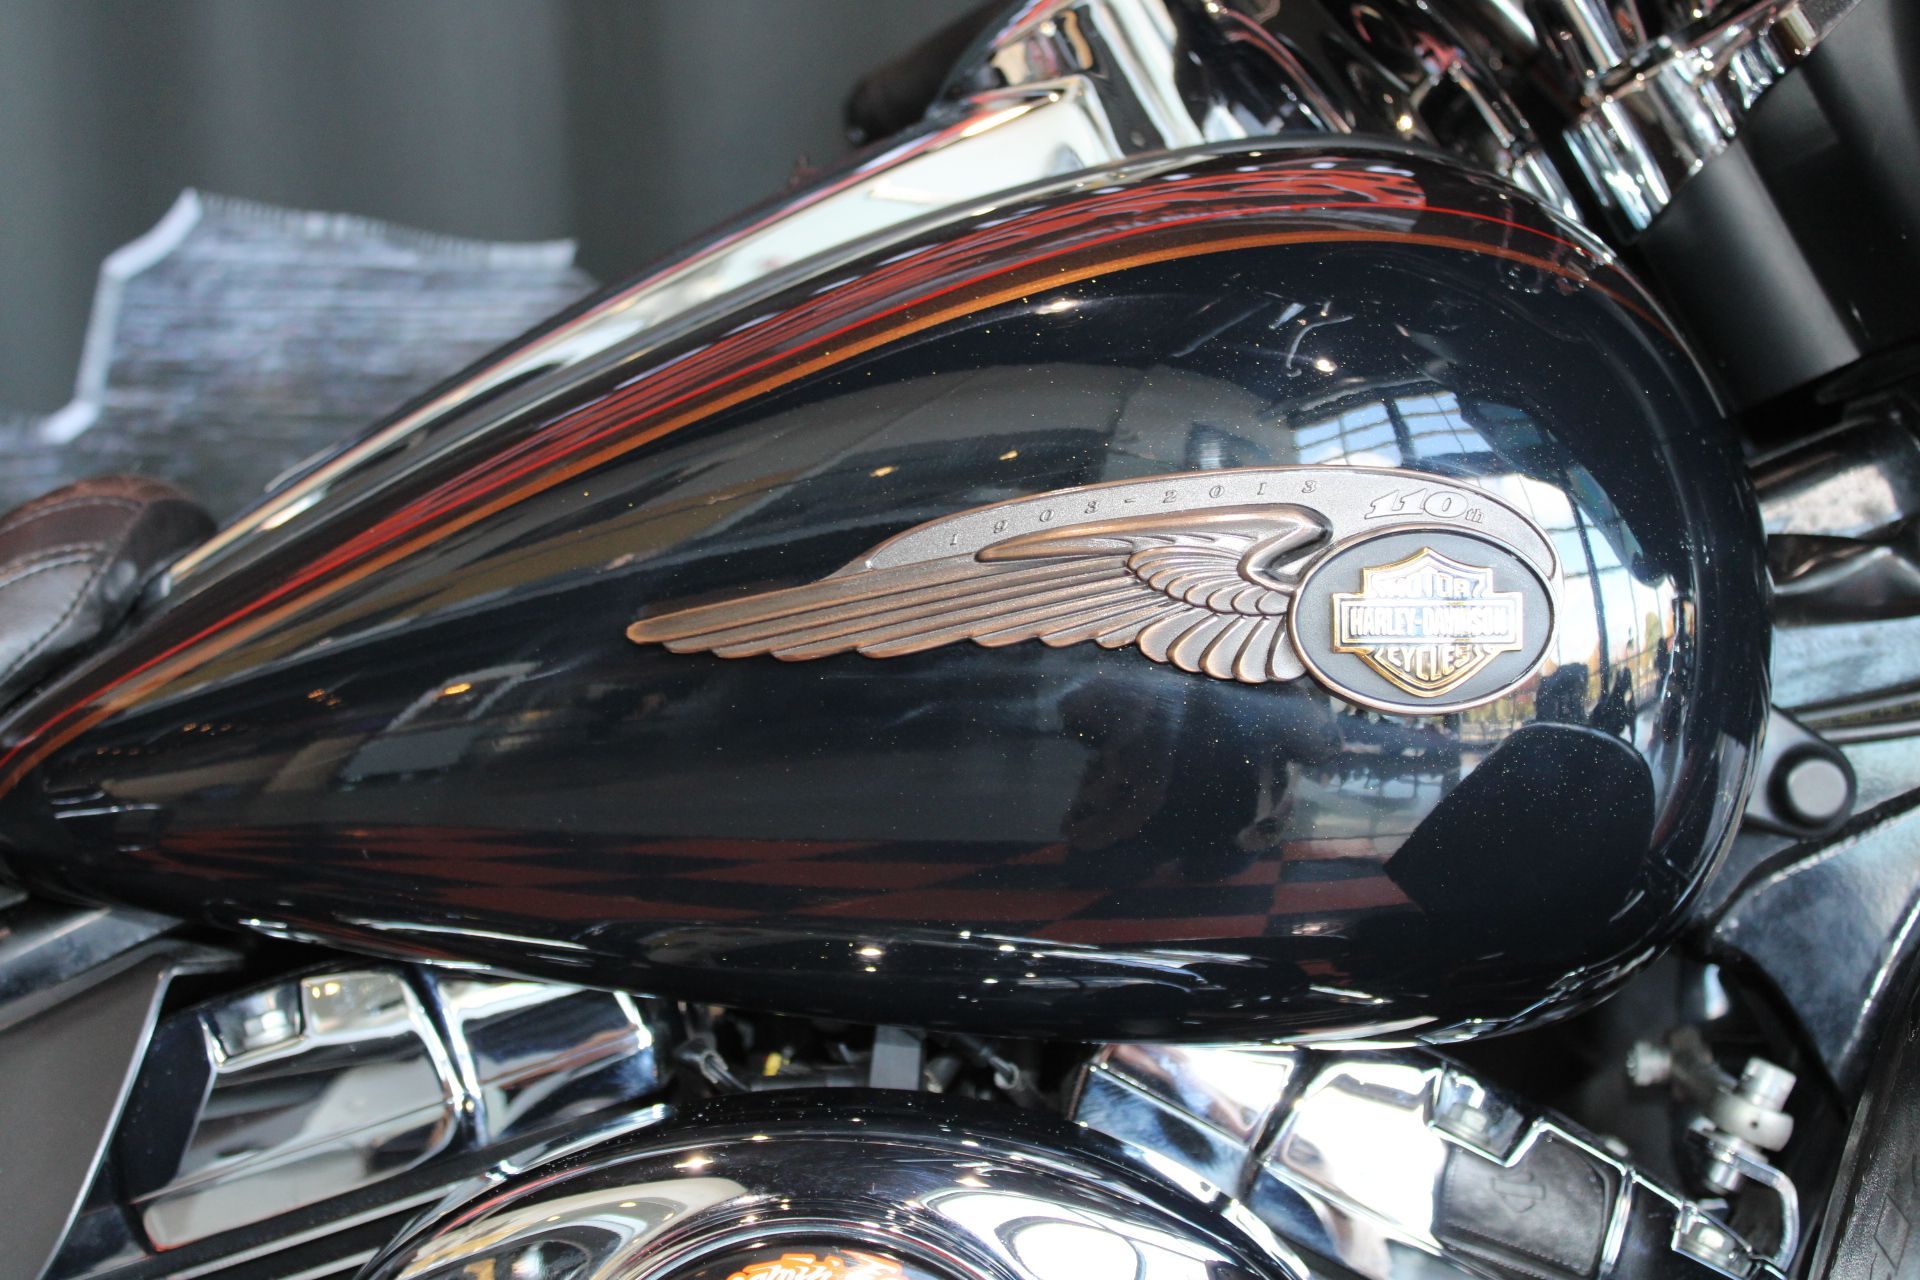 2013 Harley-Davidson Electra Glide® Ultra Limited 110th Anniversary Edition in Shorewood, Illinois - Photo 5